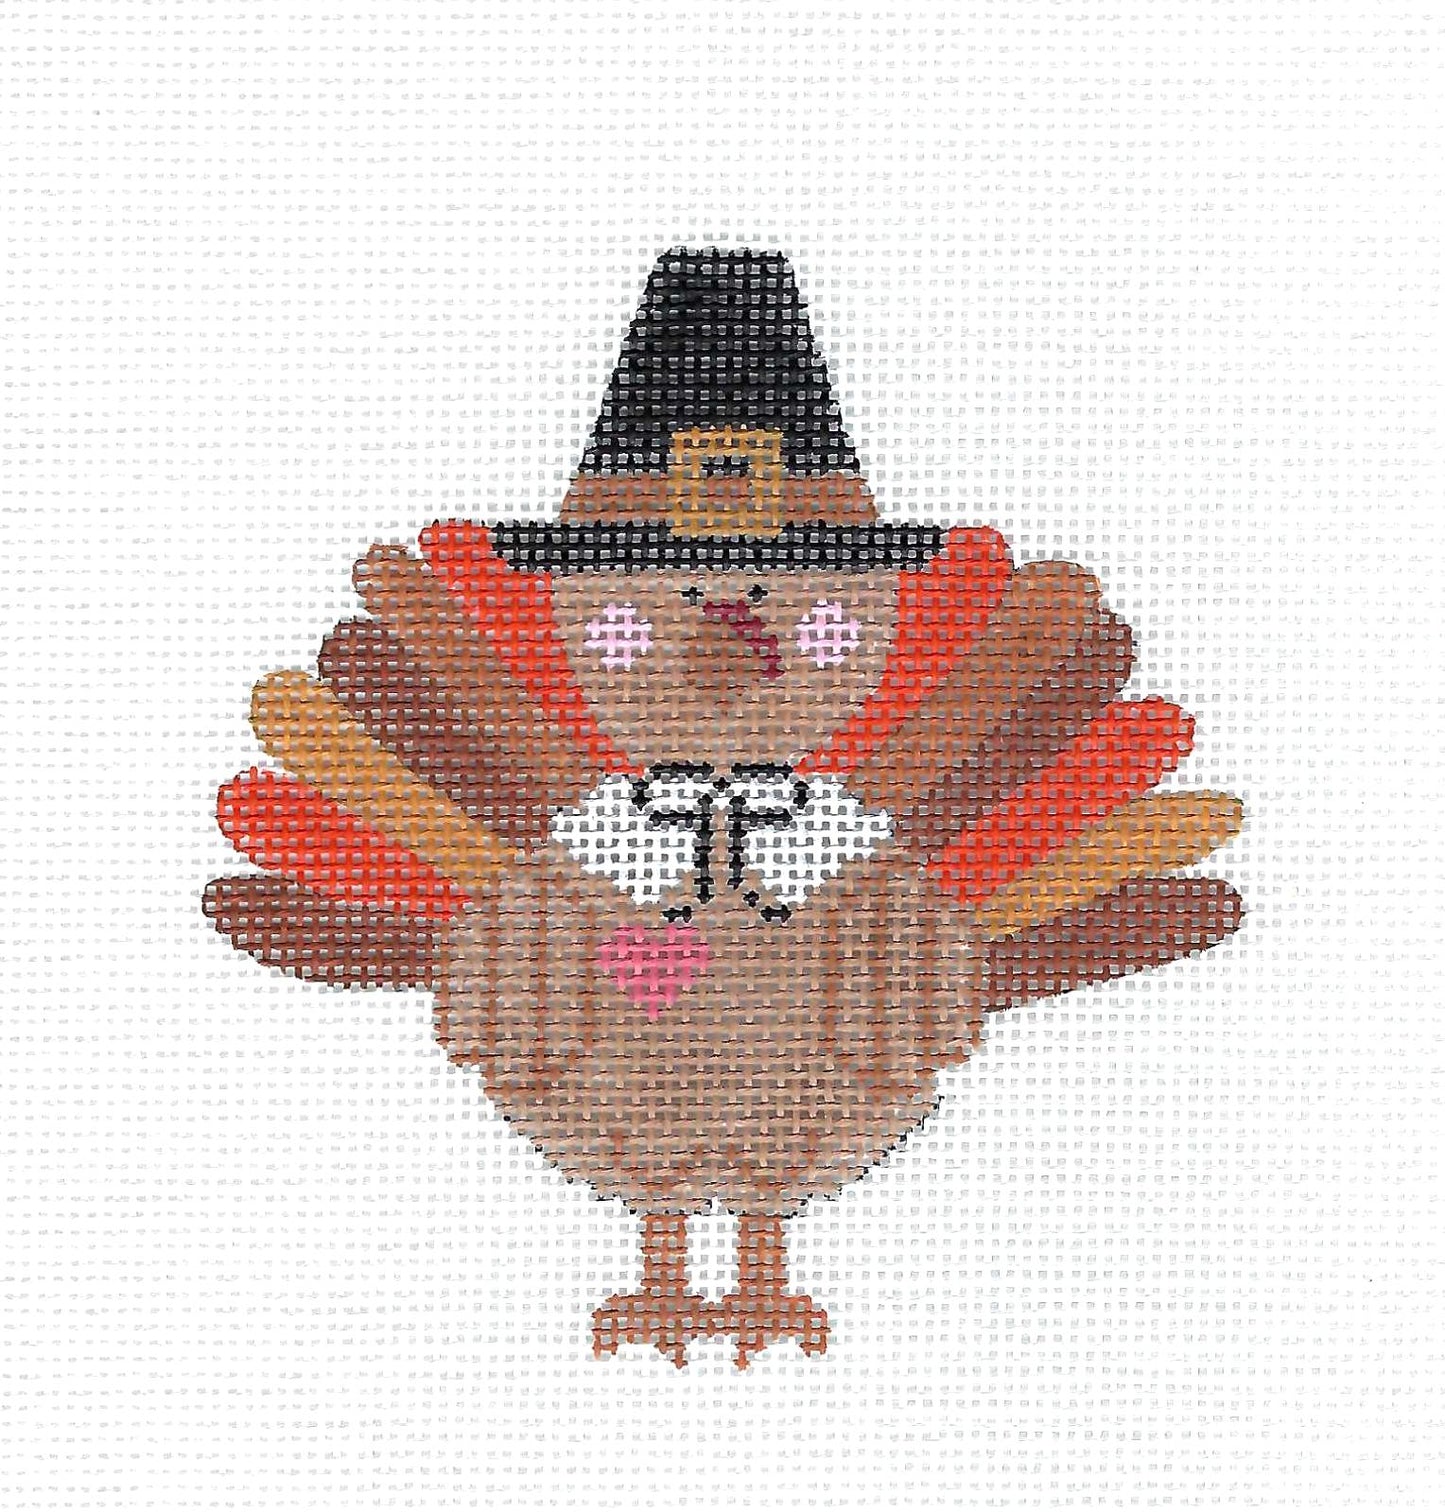 Autumn ~ Thanksgiving Turkey on handpainted Needlepoint Canvas with Stitch Guide SET by CH Designs from Danji